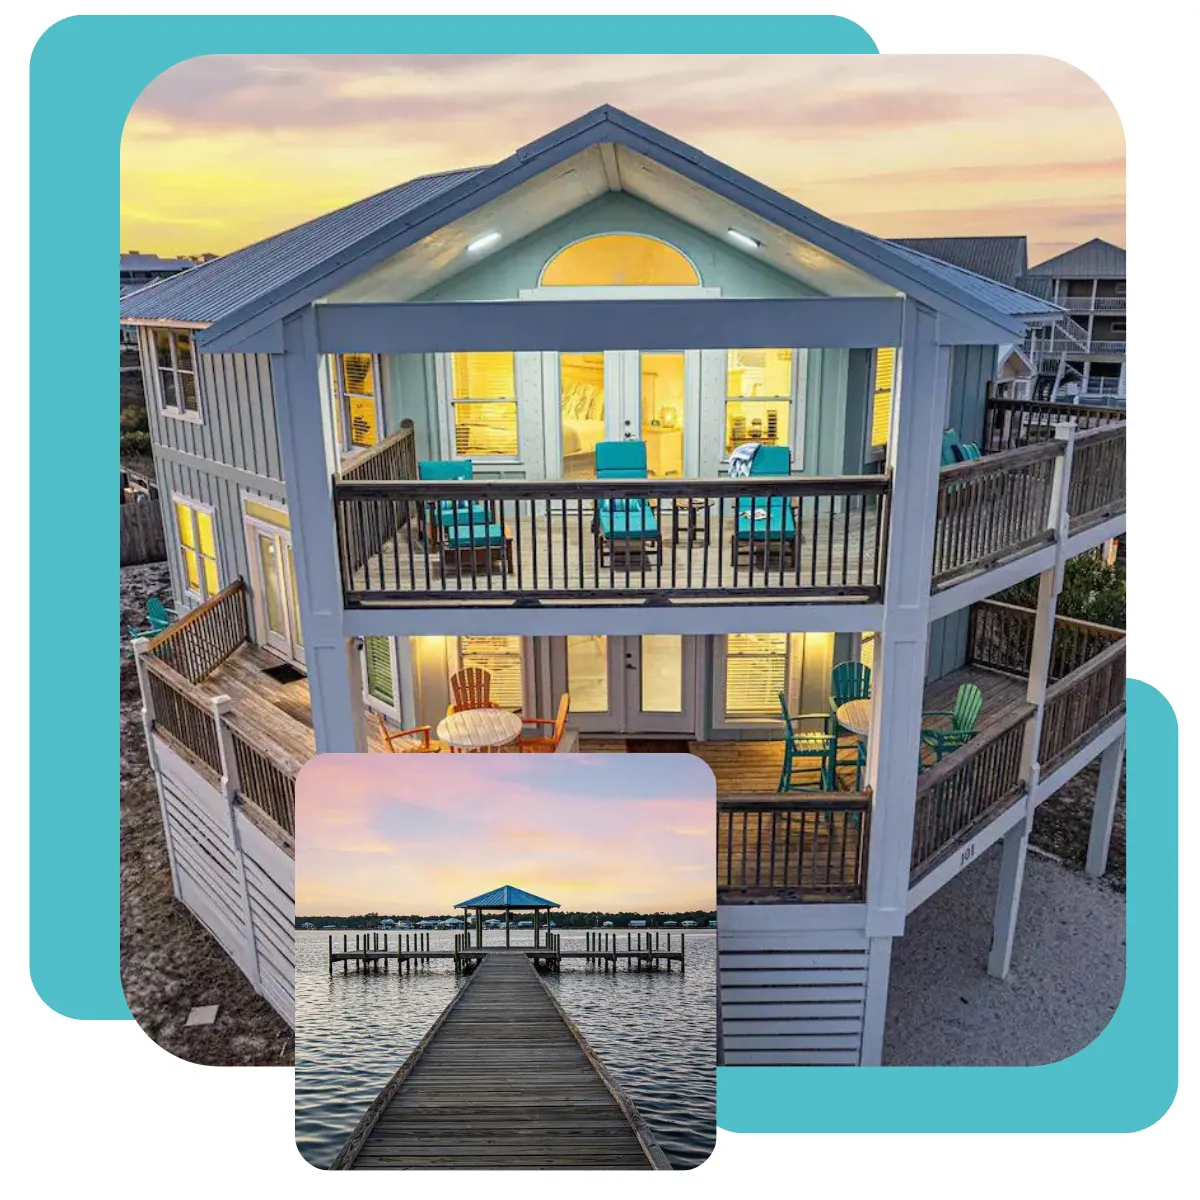 At Dune Just Fine, enjoy a cozy Gulf Shores beach stay with beach-view balconies, 3 luxury bathrooms, bedrooms, and roomy living spaces for 8 adults and 4 kids. Outside, savor al fresco dining, games, and fireside chats by the beach and attractions.